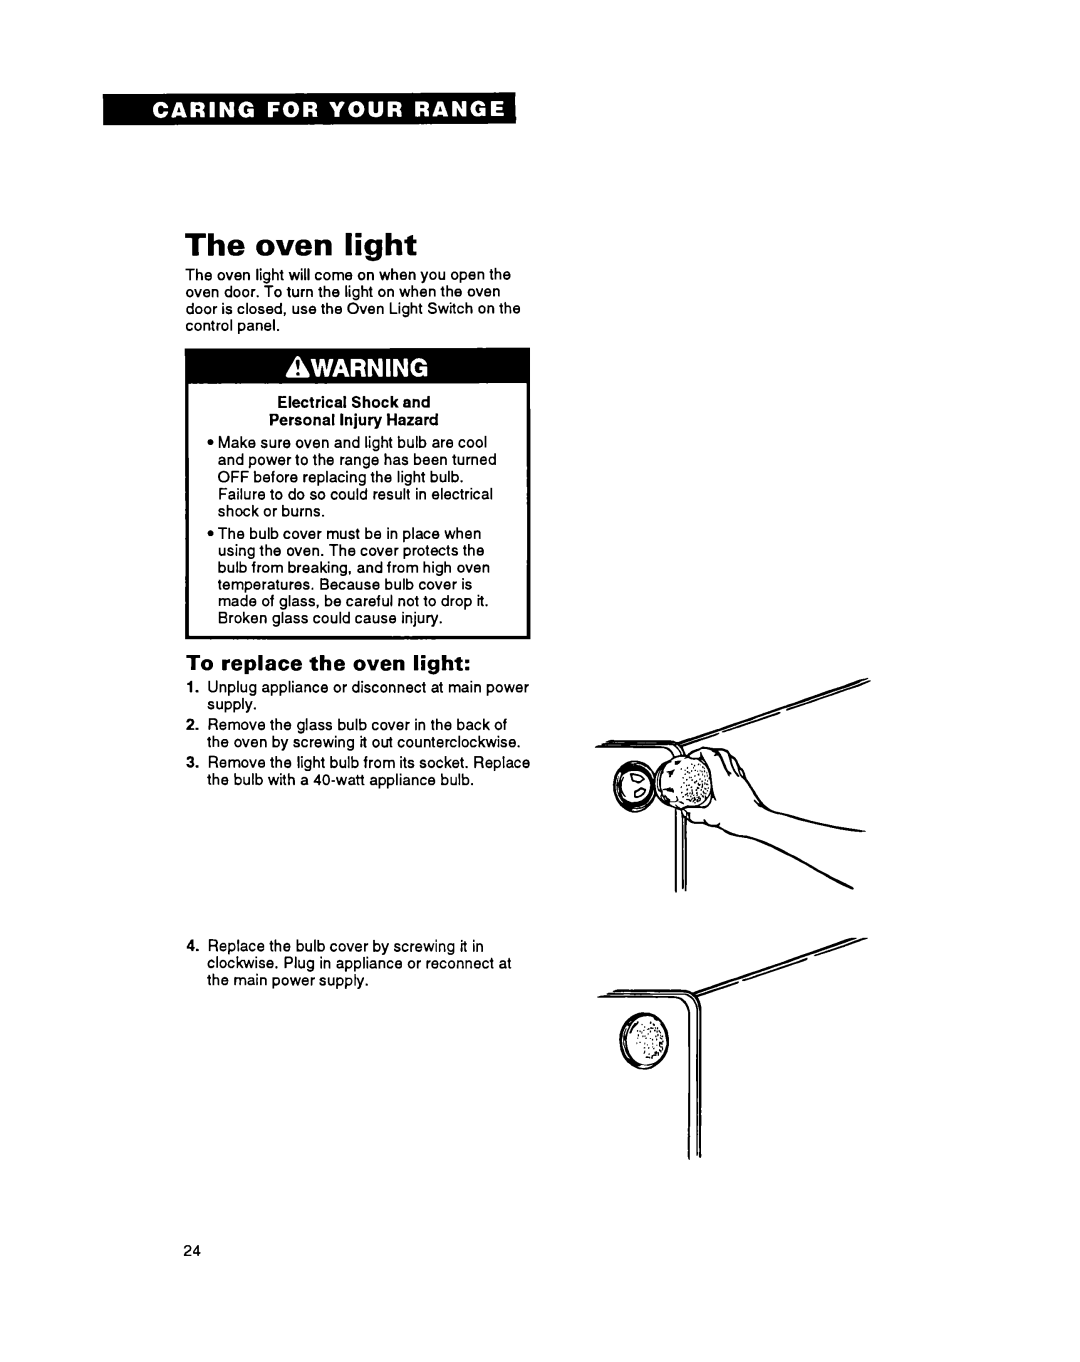 Whirlpool FEP340Y important safety instructions The oven light, To replace the oven light 